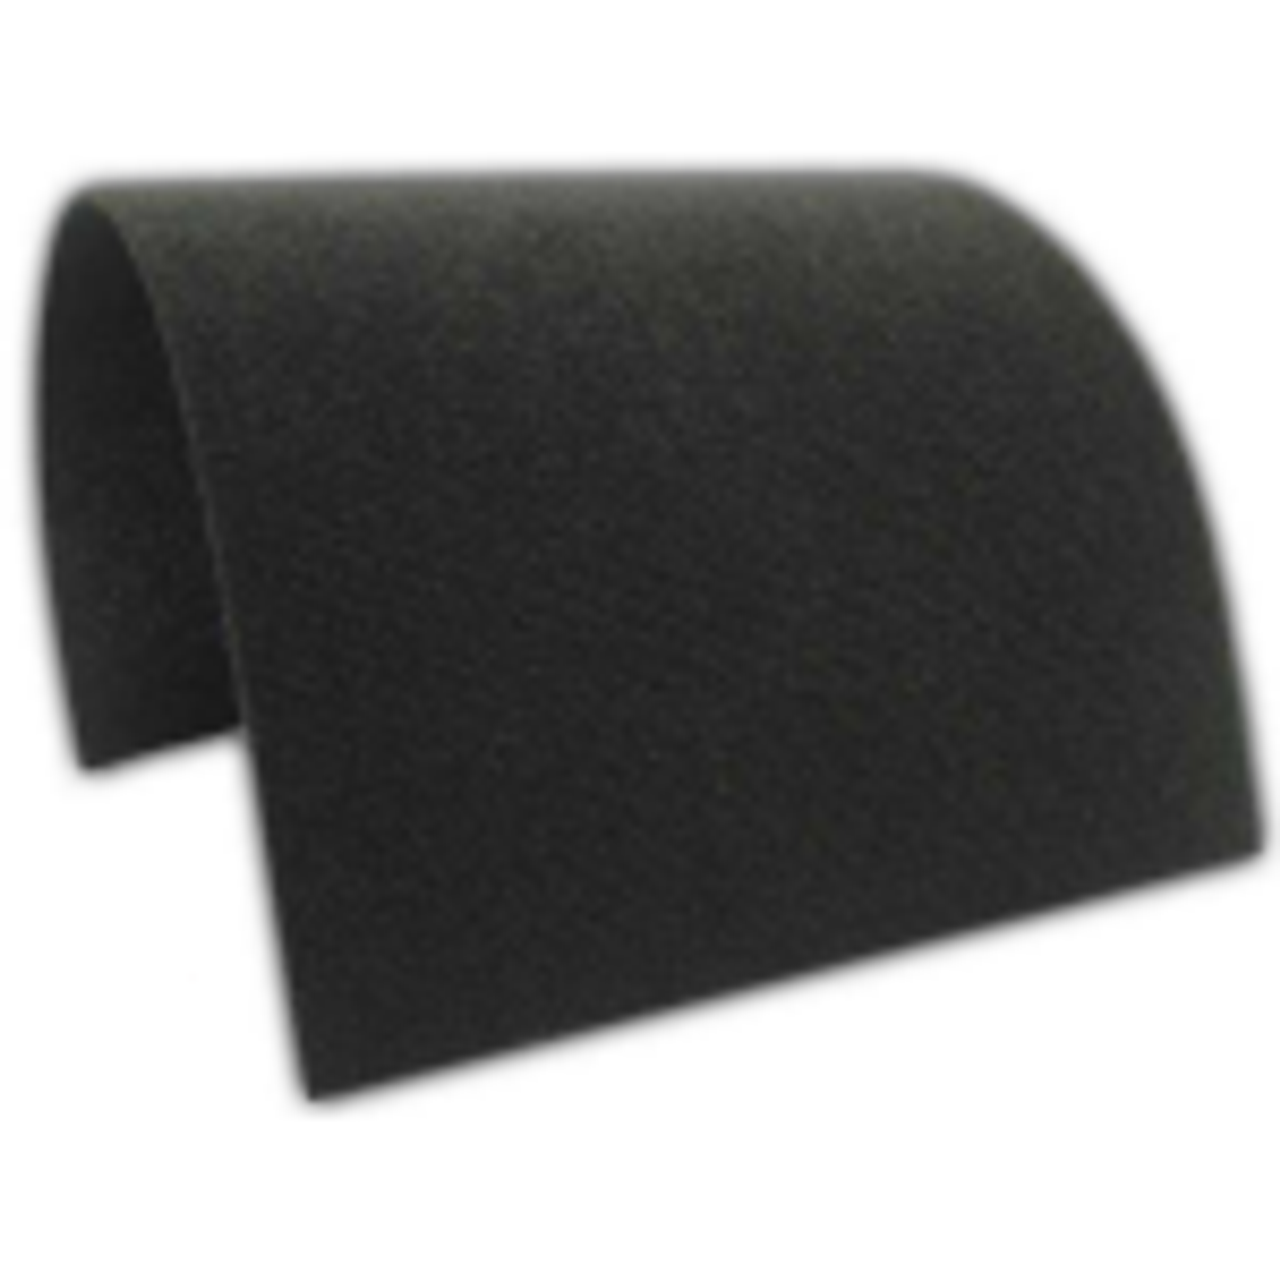 VELCRO® Brand Knit Loop 3610 with 19 Adhesive